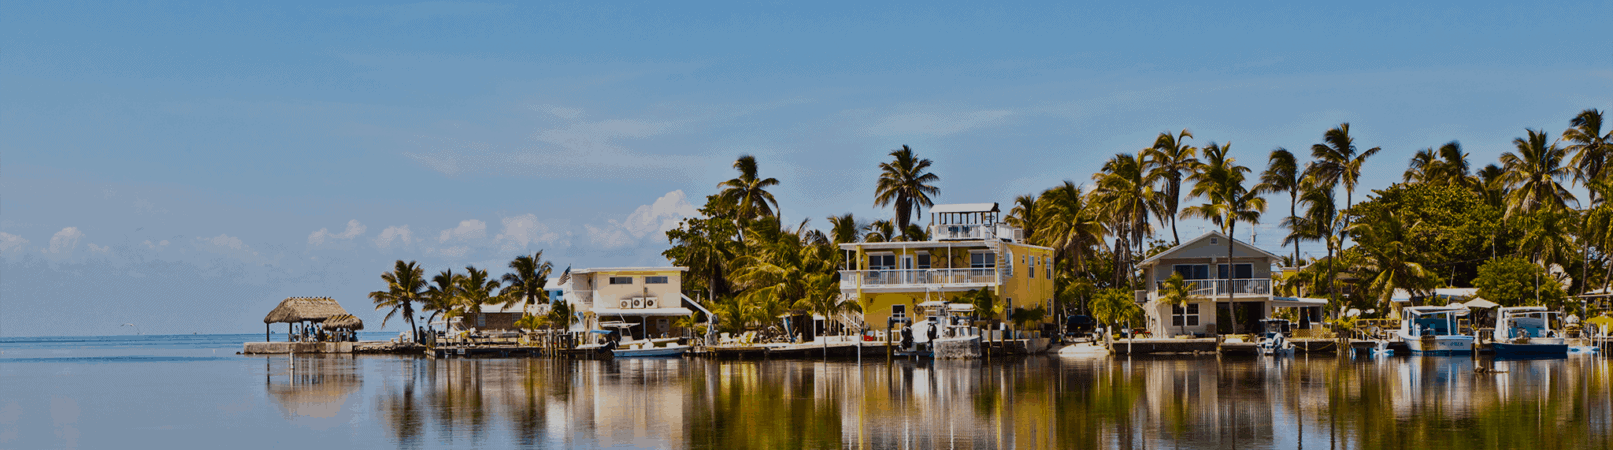 Travel deals in Key West